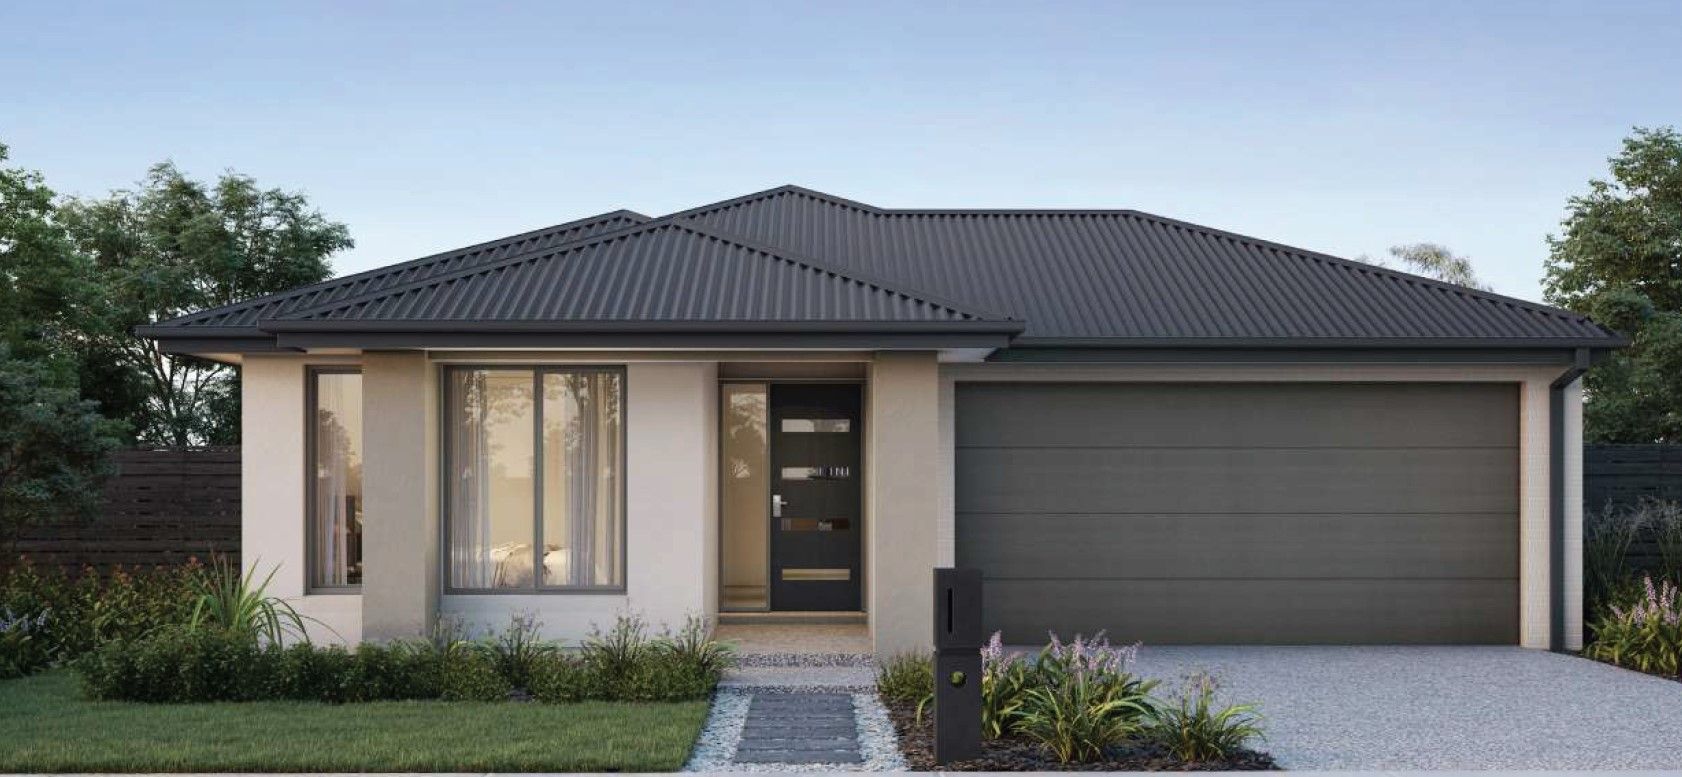 3 bedrooms New House & Land in Lot 431 Basin Street FRASER RISE VIC, 3336